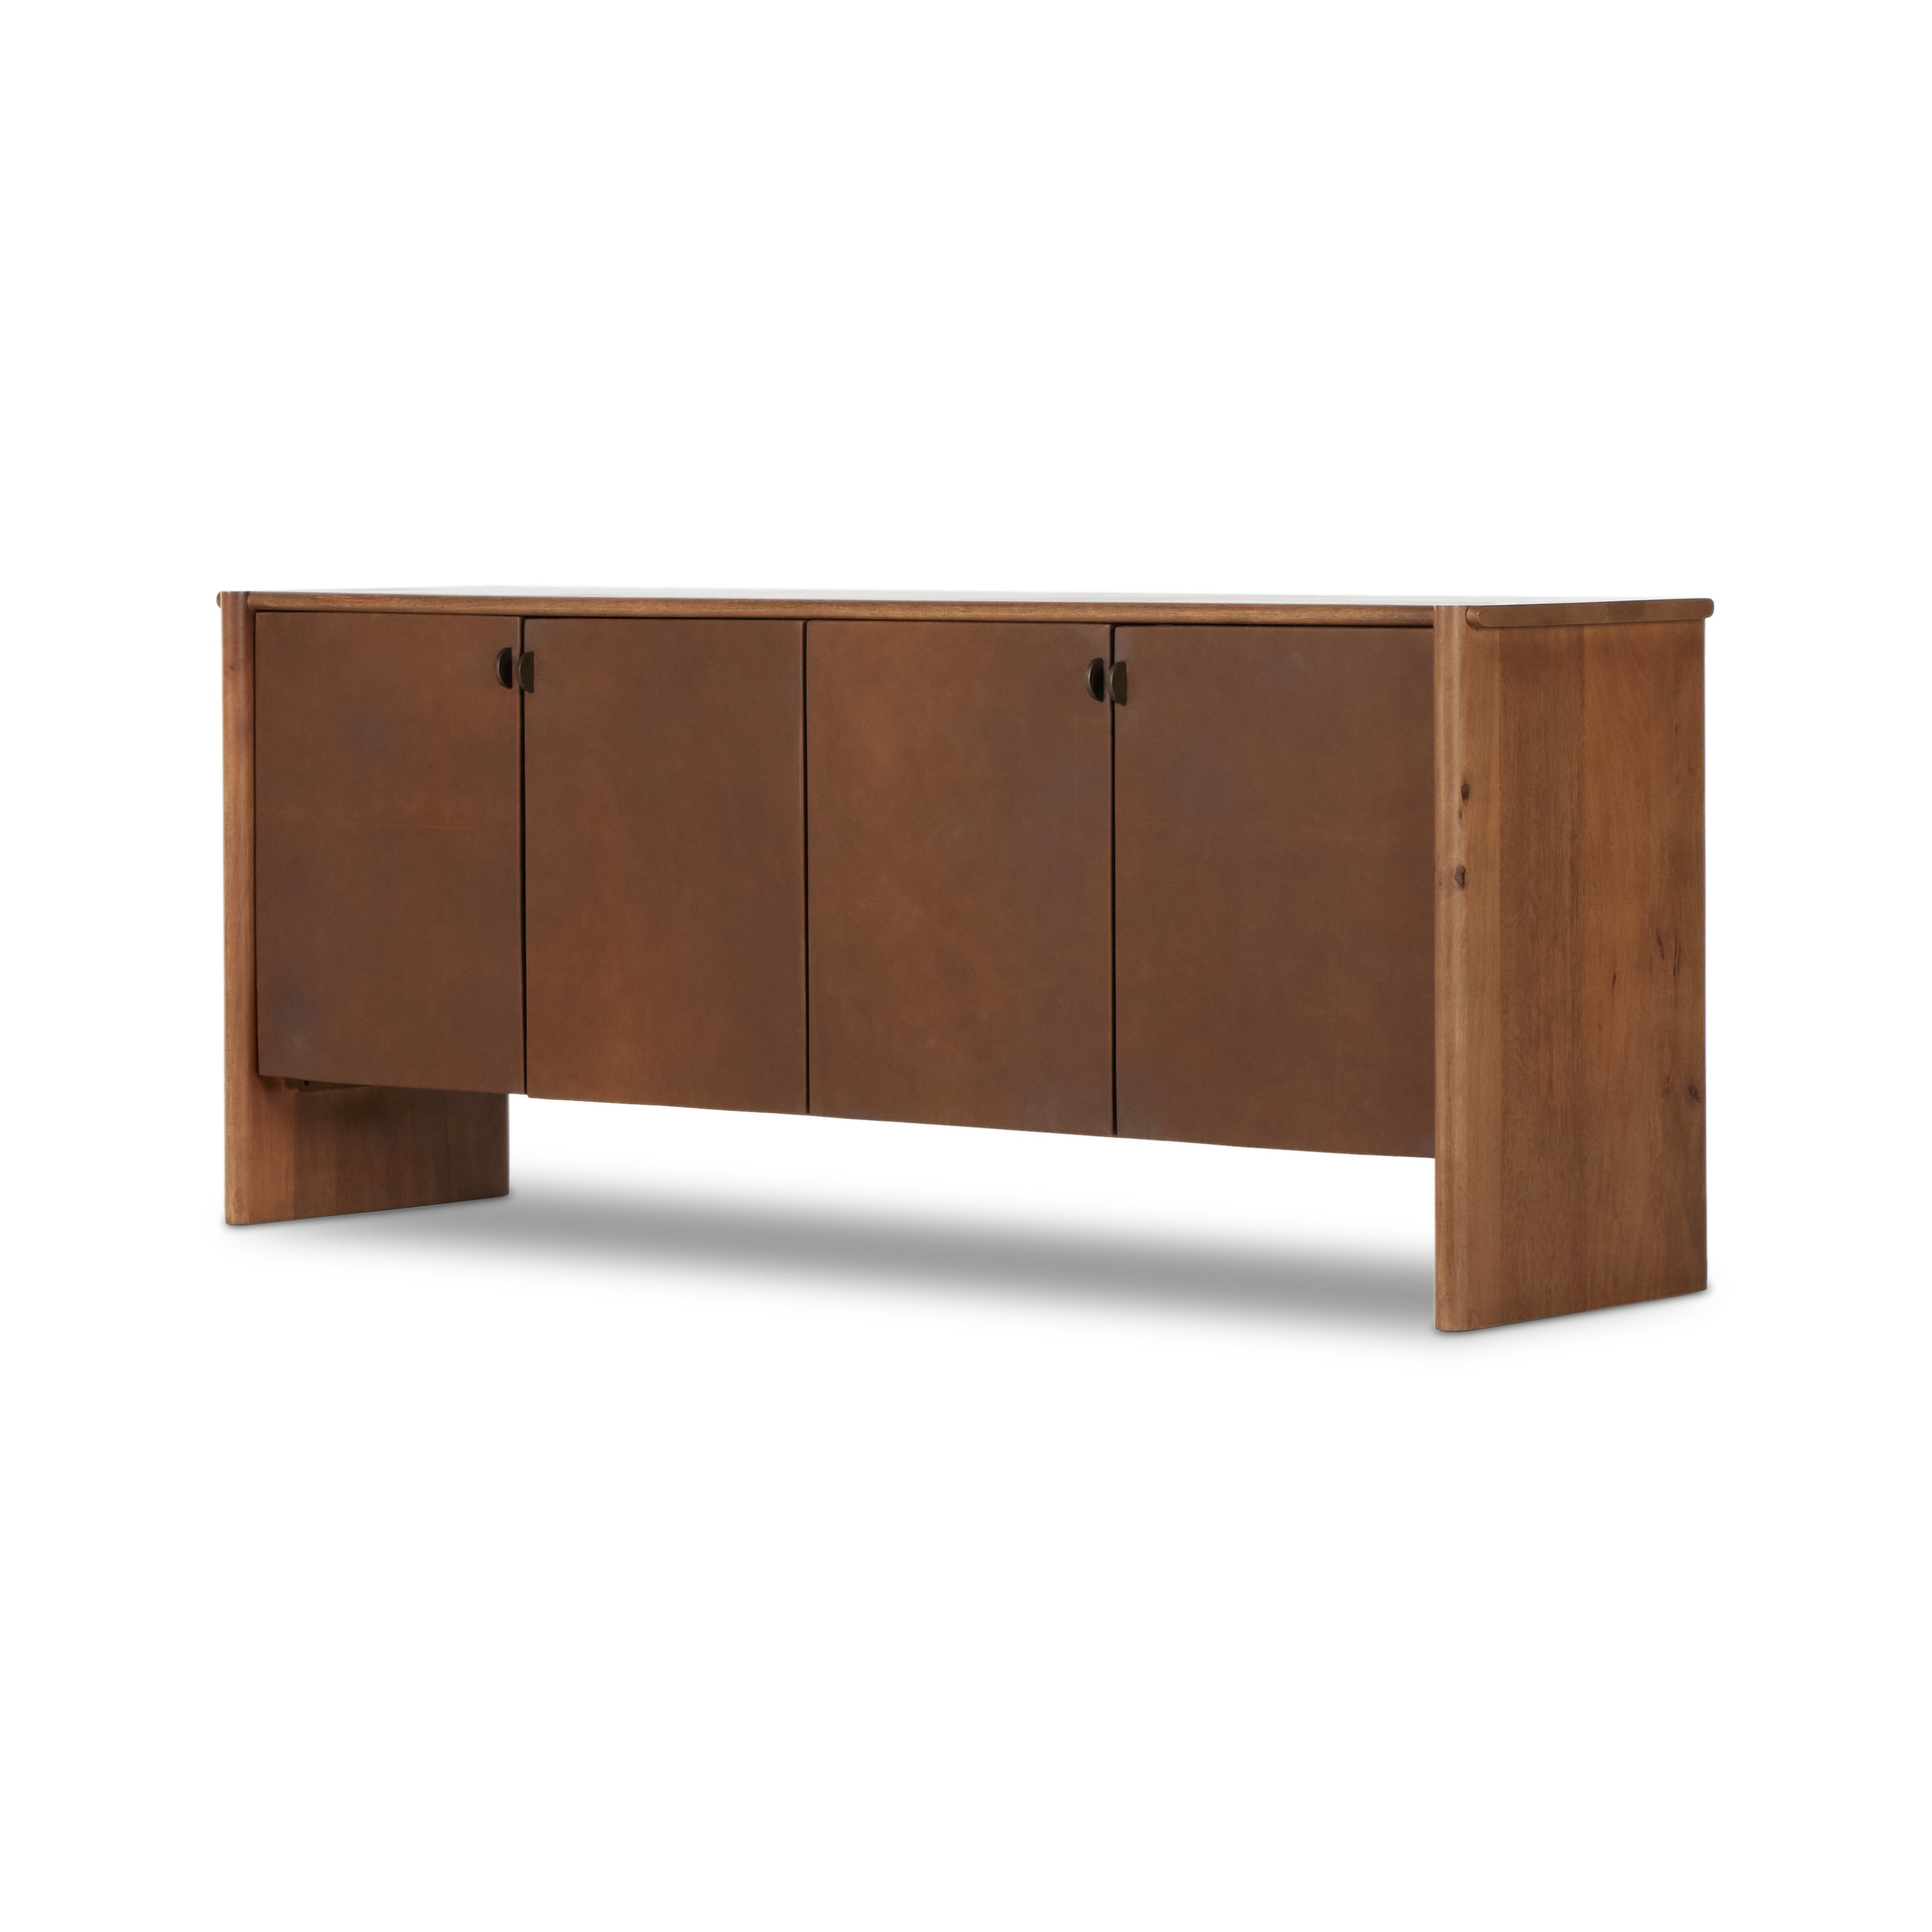 Curved edges and connection points meet leather door fronts, creating a smooth hand feel and look. Rounded offset hardware finishes this mango wood sideboard. Amethyst Home provides interior design, new construction, custom furniture, and area rugs in the Des Moines metro area.